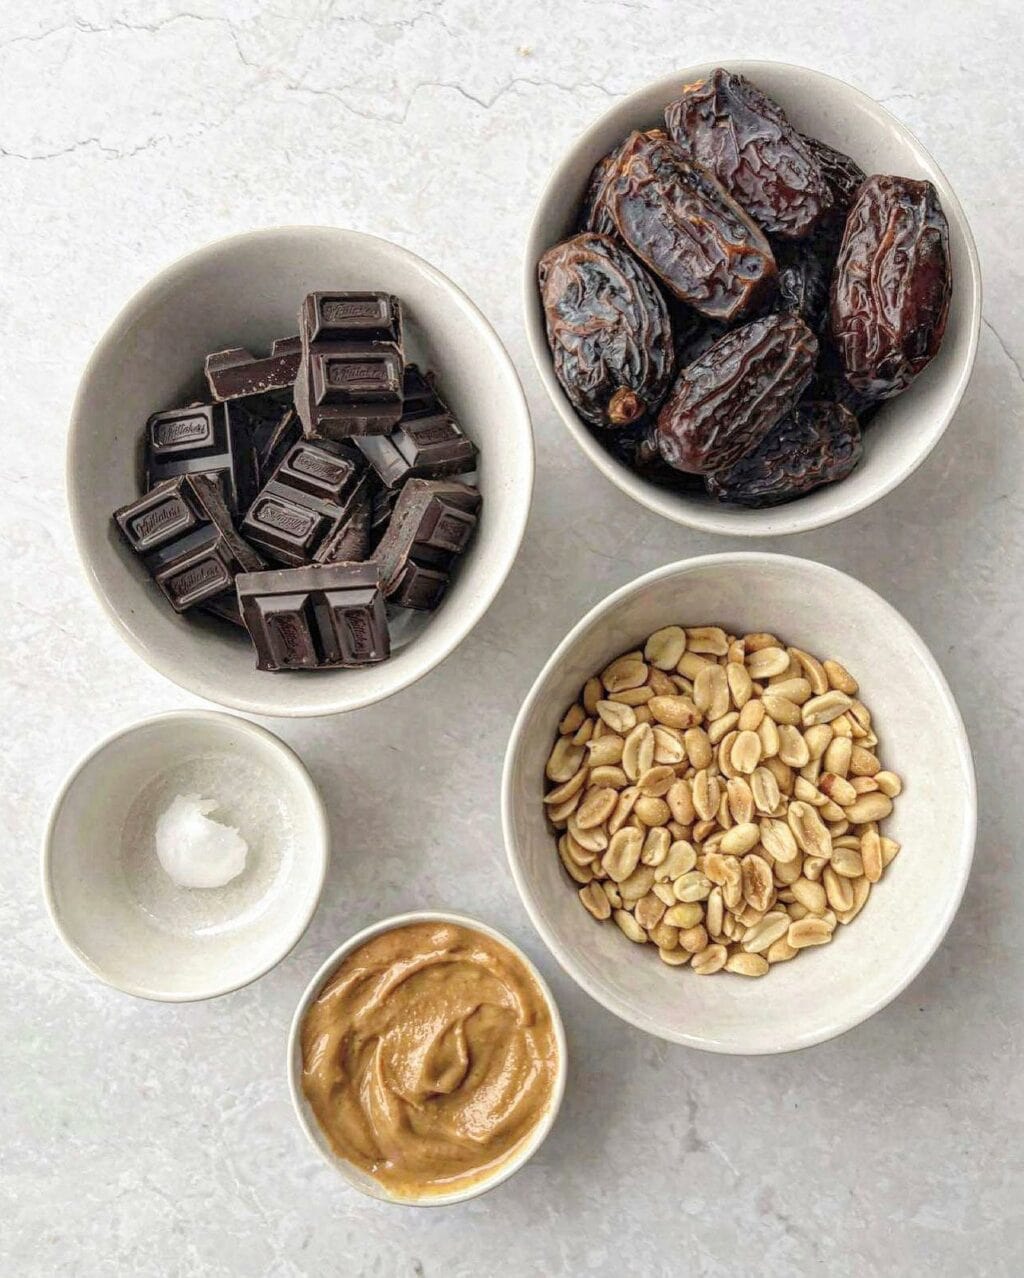 Ingredients for peanut chocolate date bark including dark chocolate, medjool dates, salted roasted peanuts, coconut oil and peanut butter